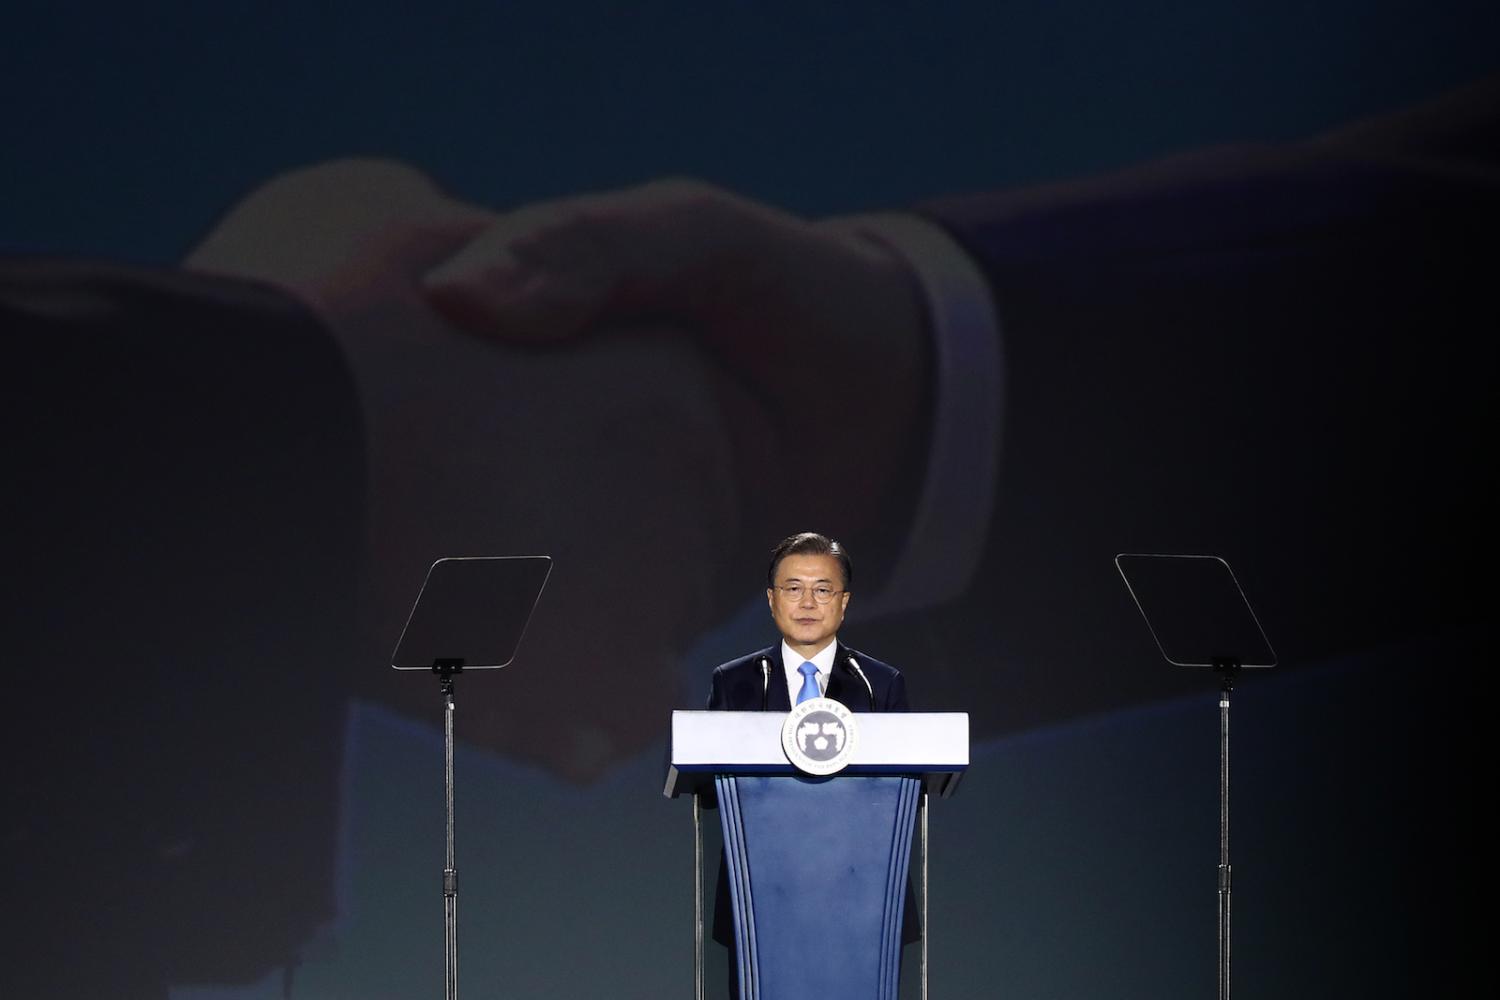 South Korean President Moon Jae-in speaking on the 75th anniversary of Liberation Day, 15 August 2020 in Seoul (Chung Sung-Jun/Getty Images)